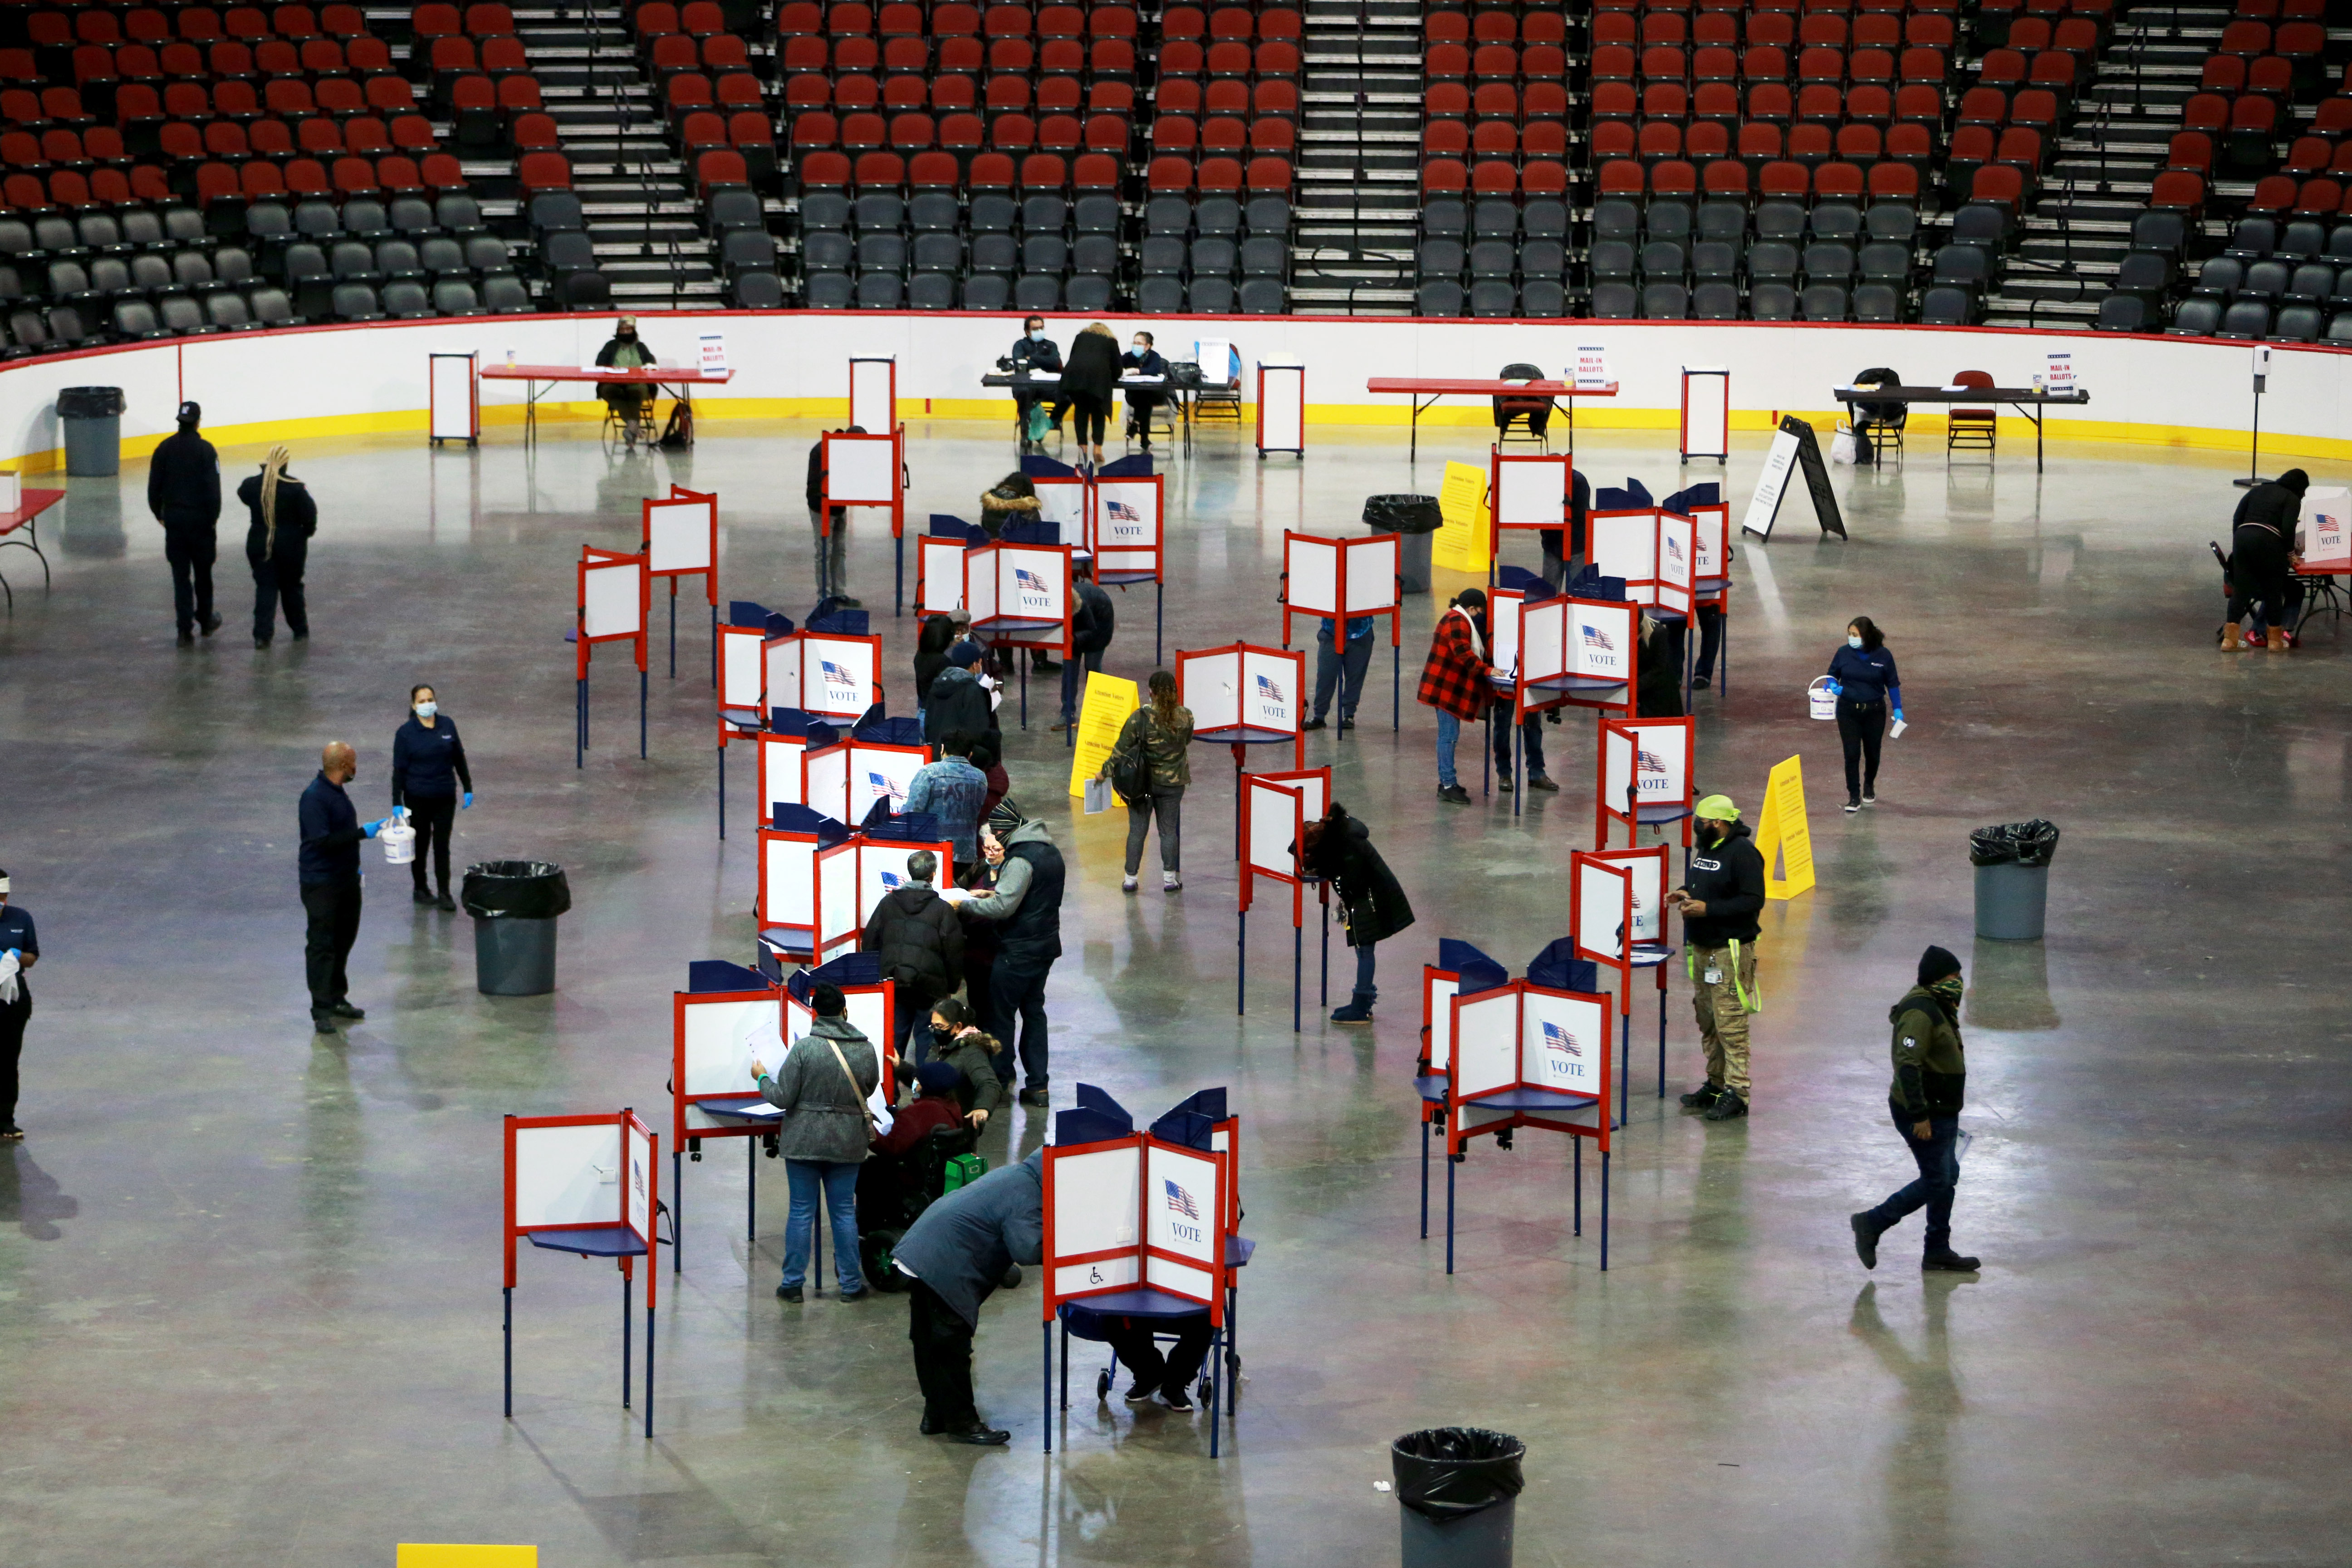 Newark's Prudential Center to be 2020 Election polling site, host  registration drive